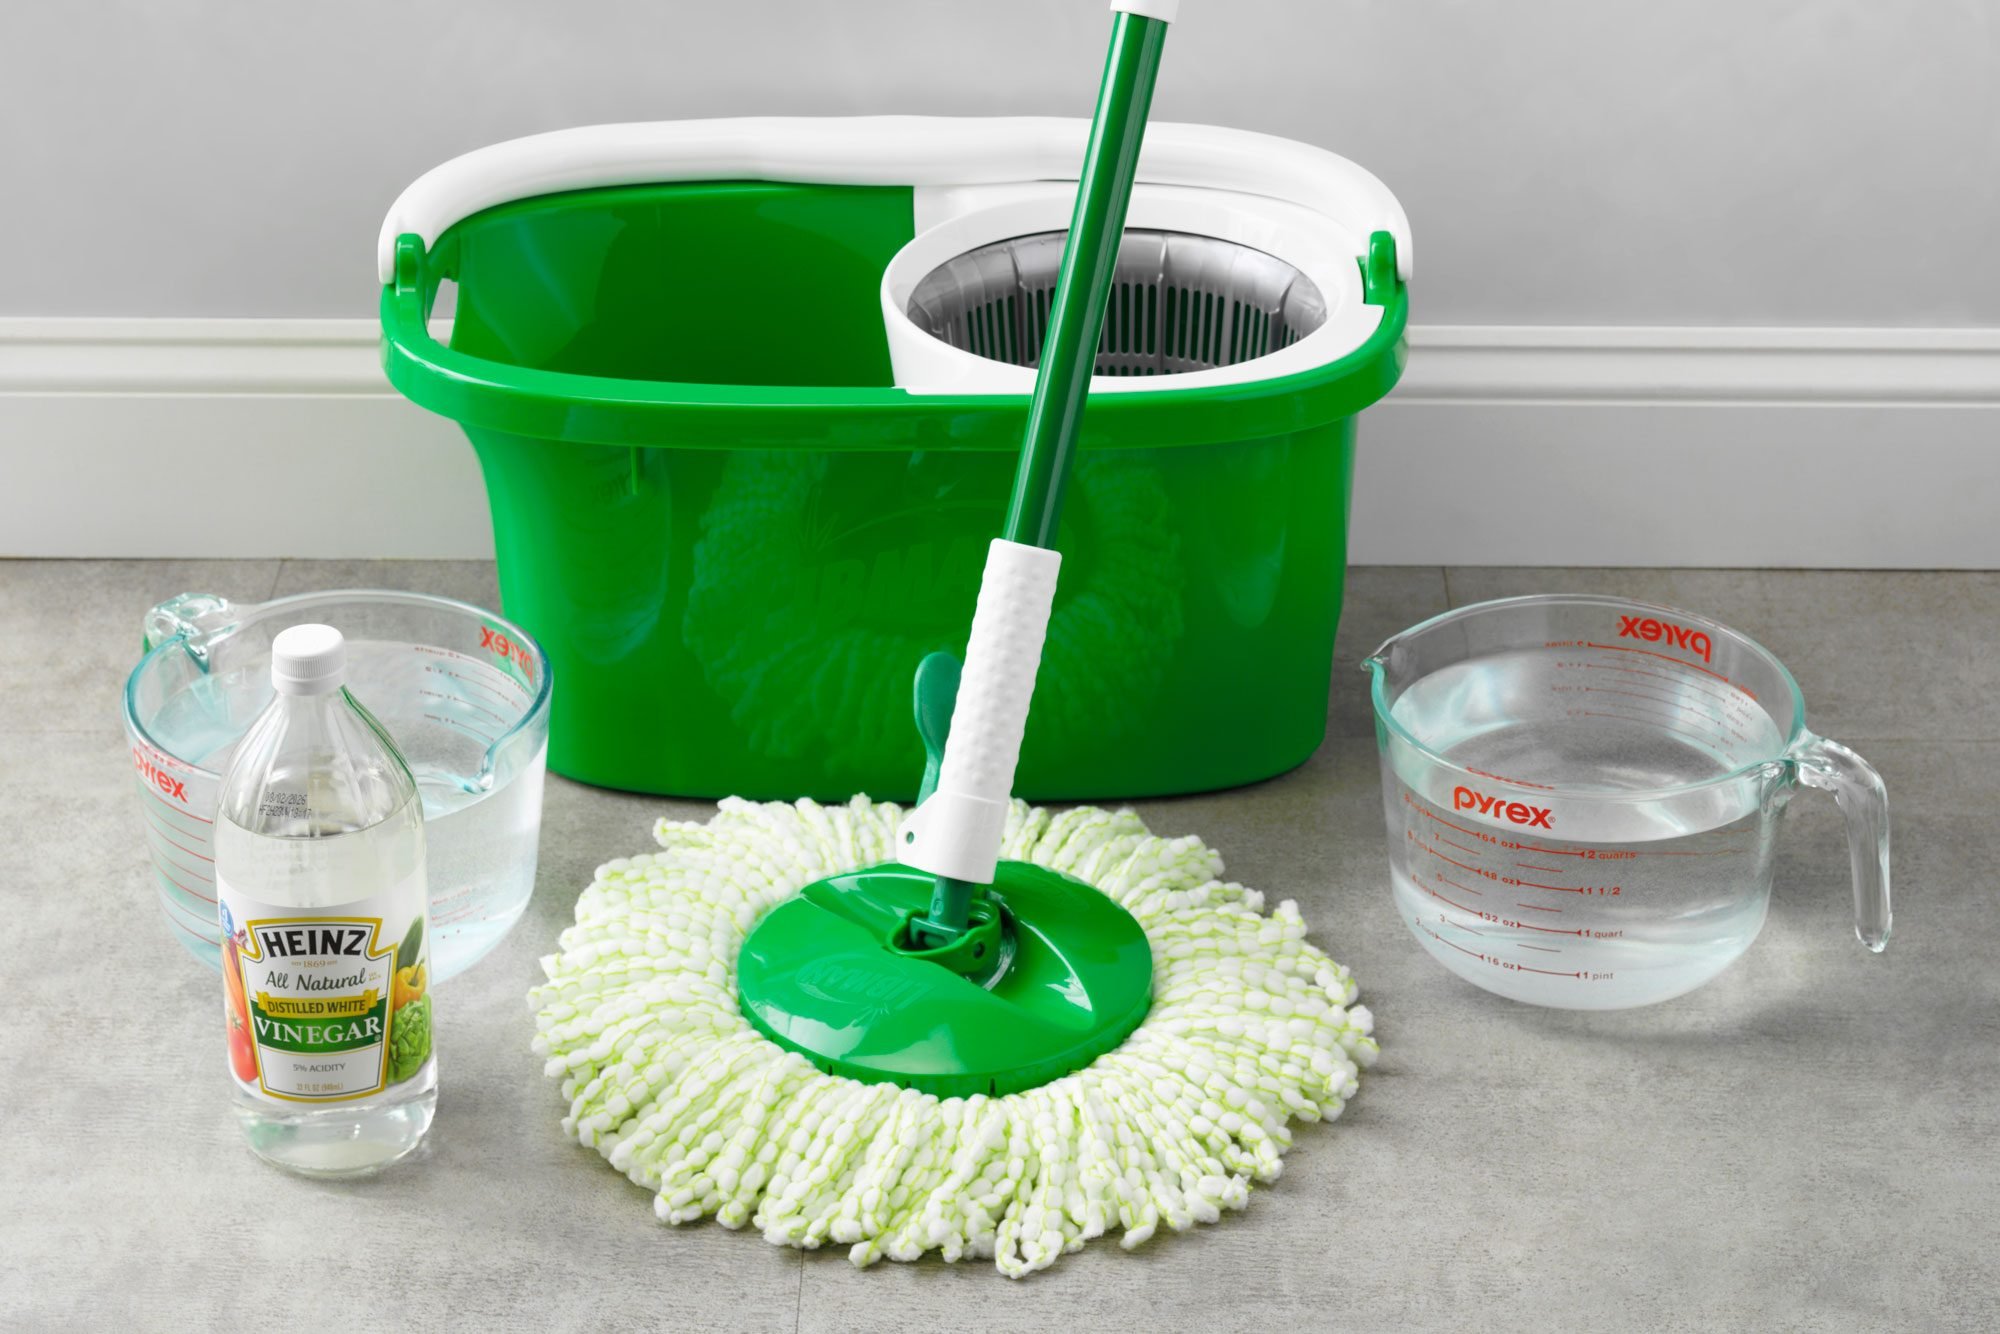 Homemade Floor Cleaner: How To Get Your Floors Gleaming Without Vinegar